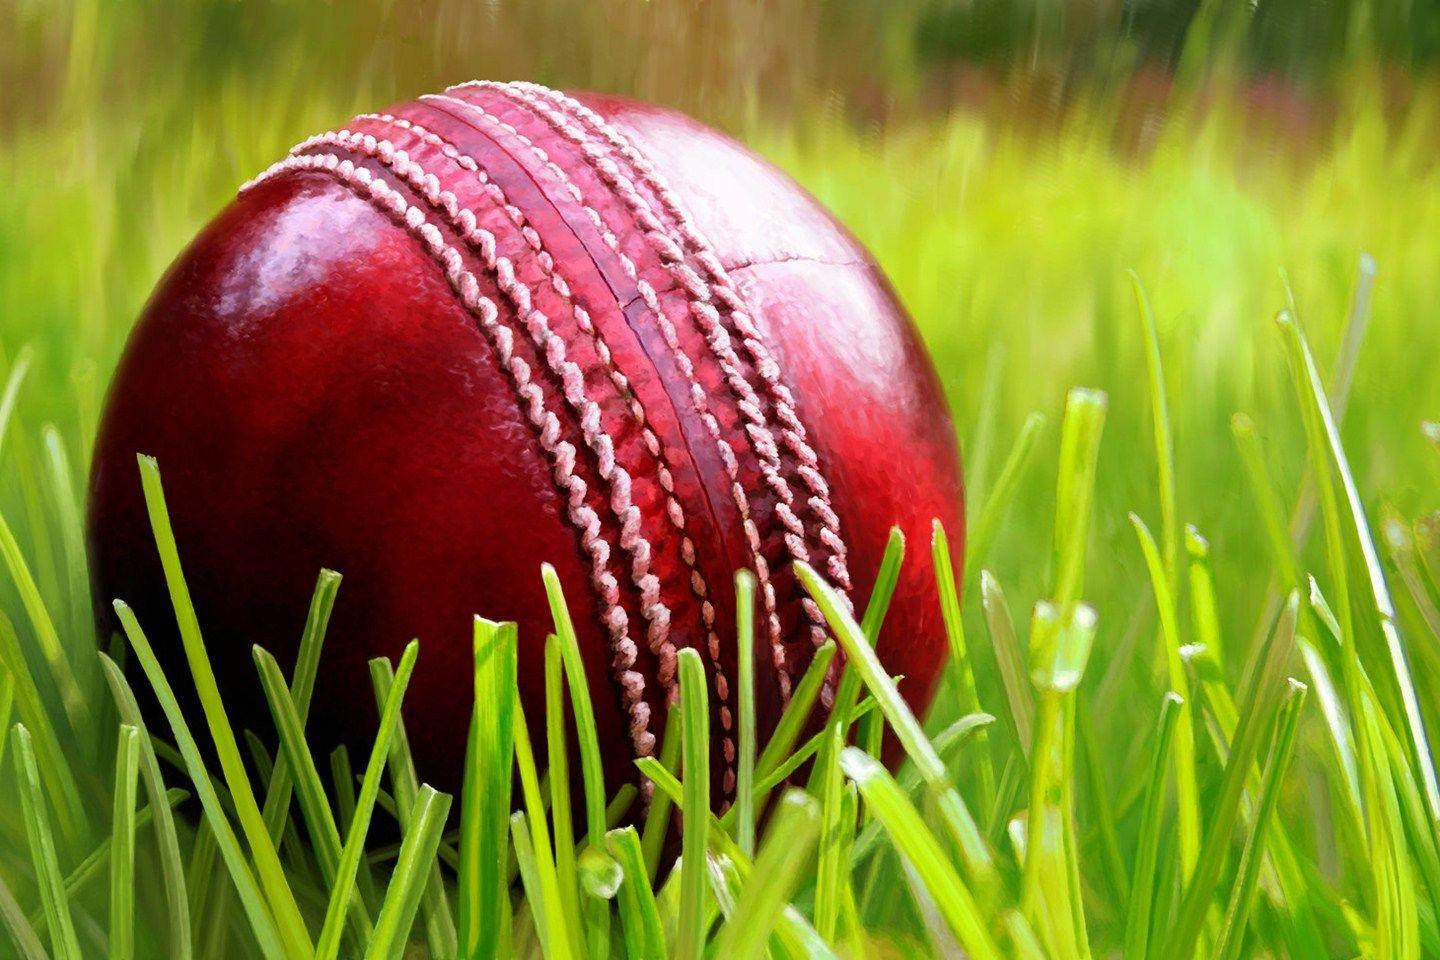 Cricket Ball Image, Picture, Photo, HD Wallpaper